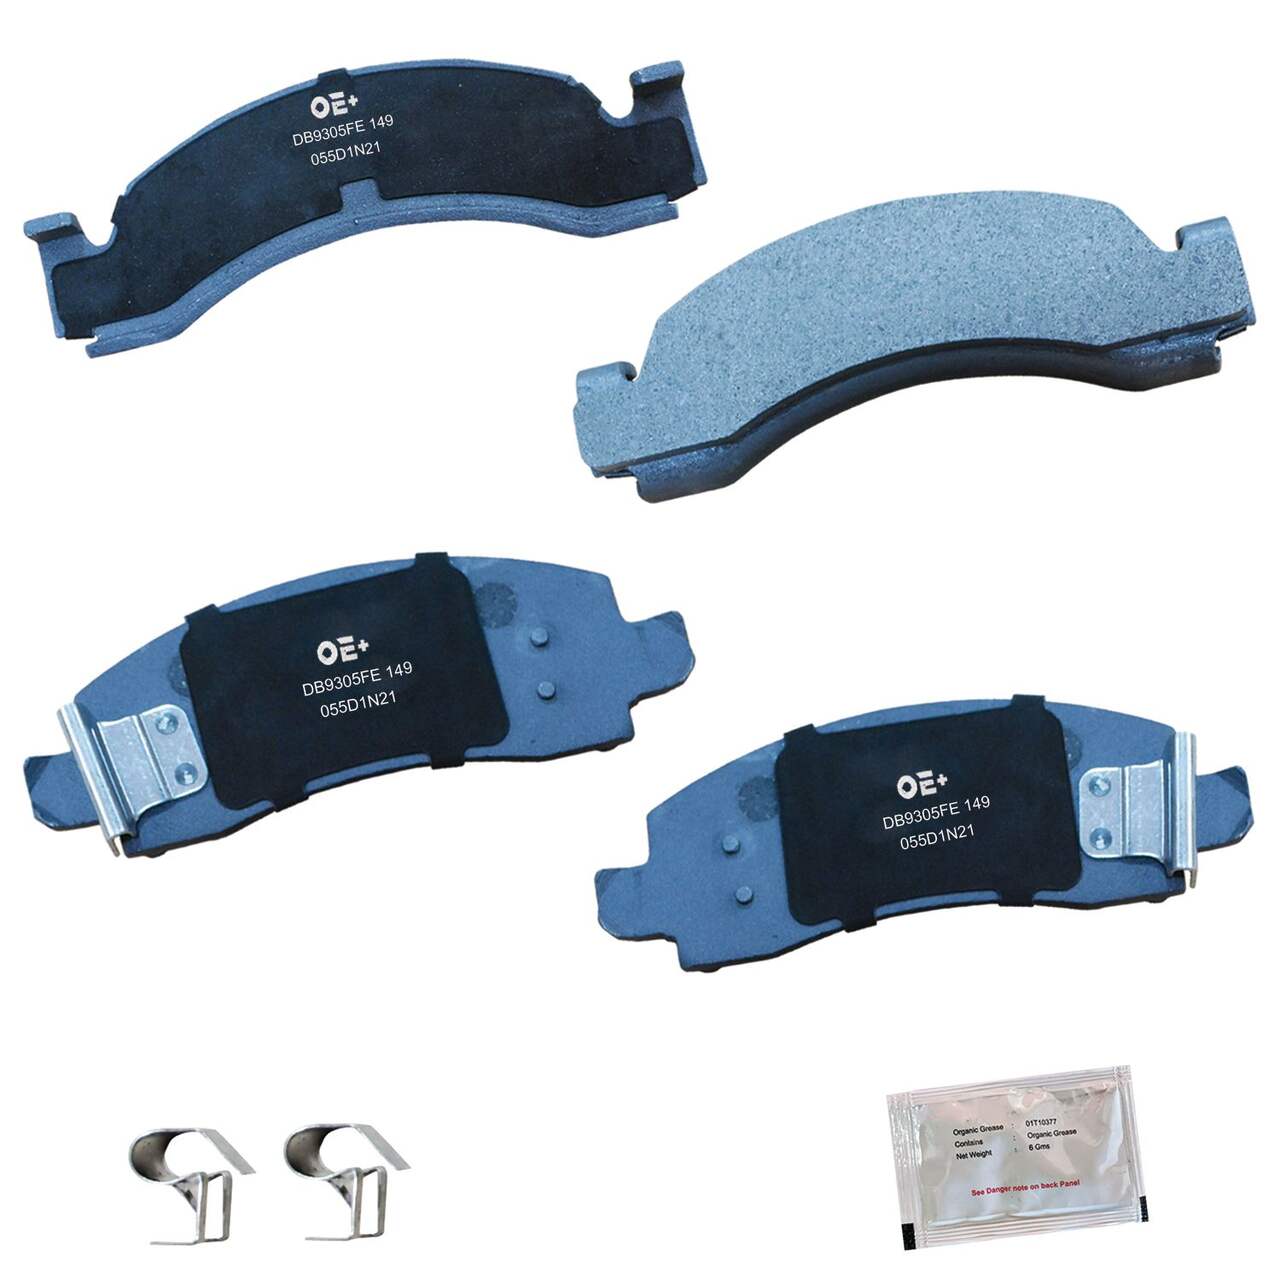 PRO-SERIES OE+ Brake Pads, Front or Rear